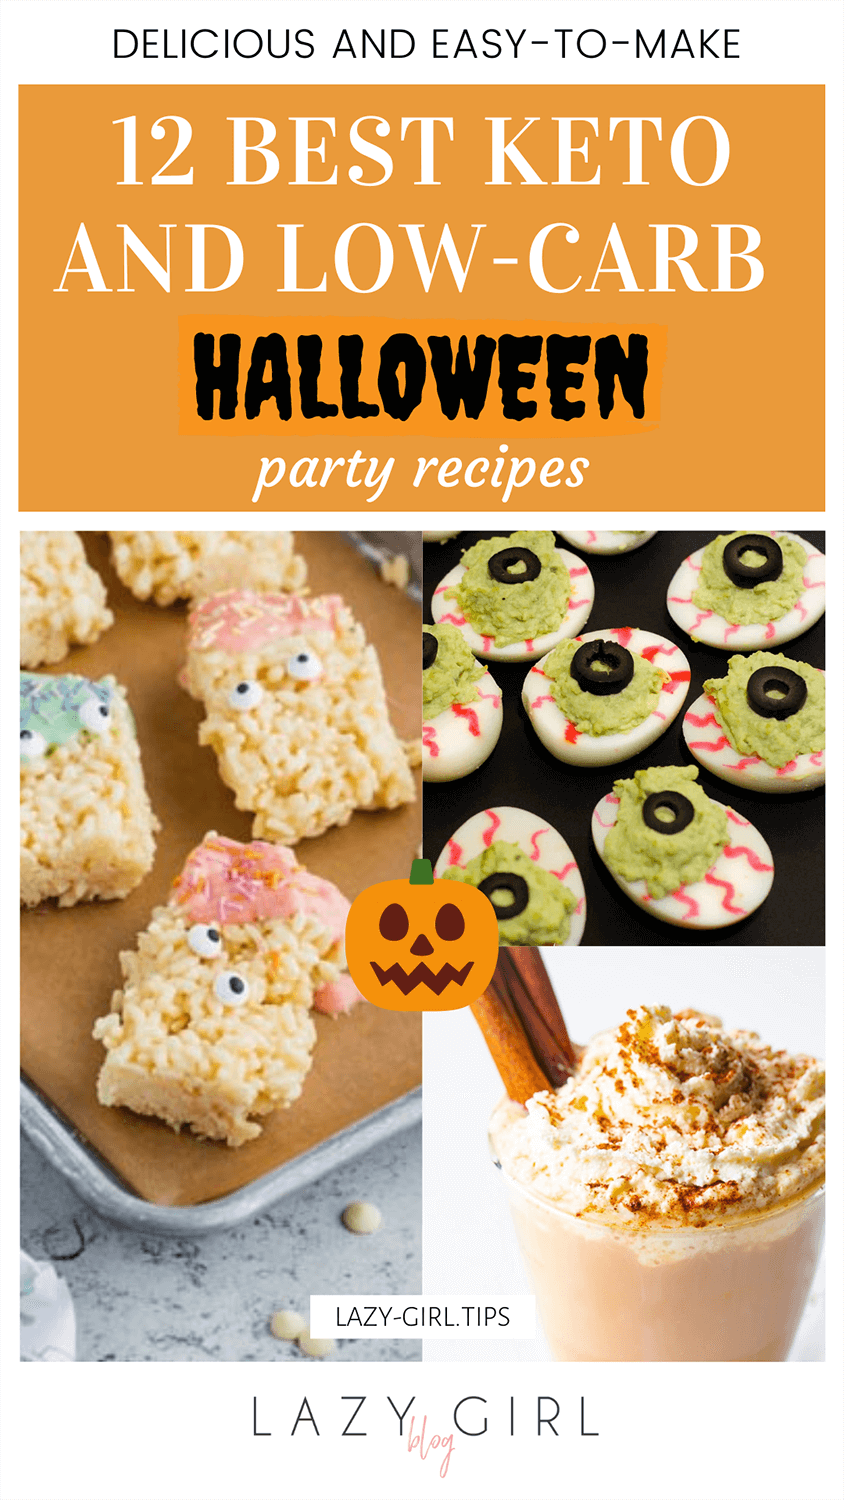 12 Best Keto and Low-carb Halloween Recipes.